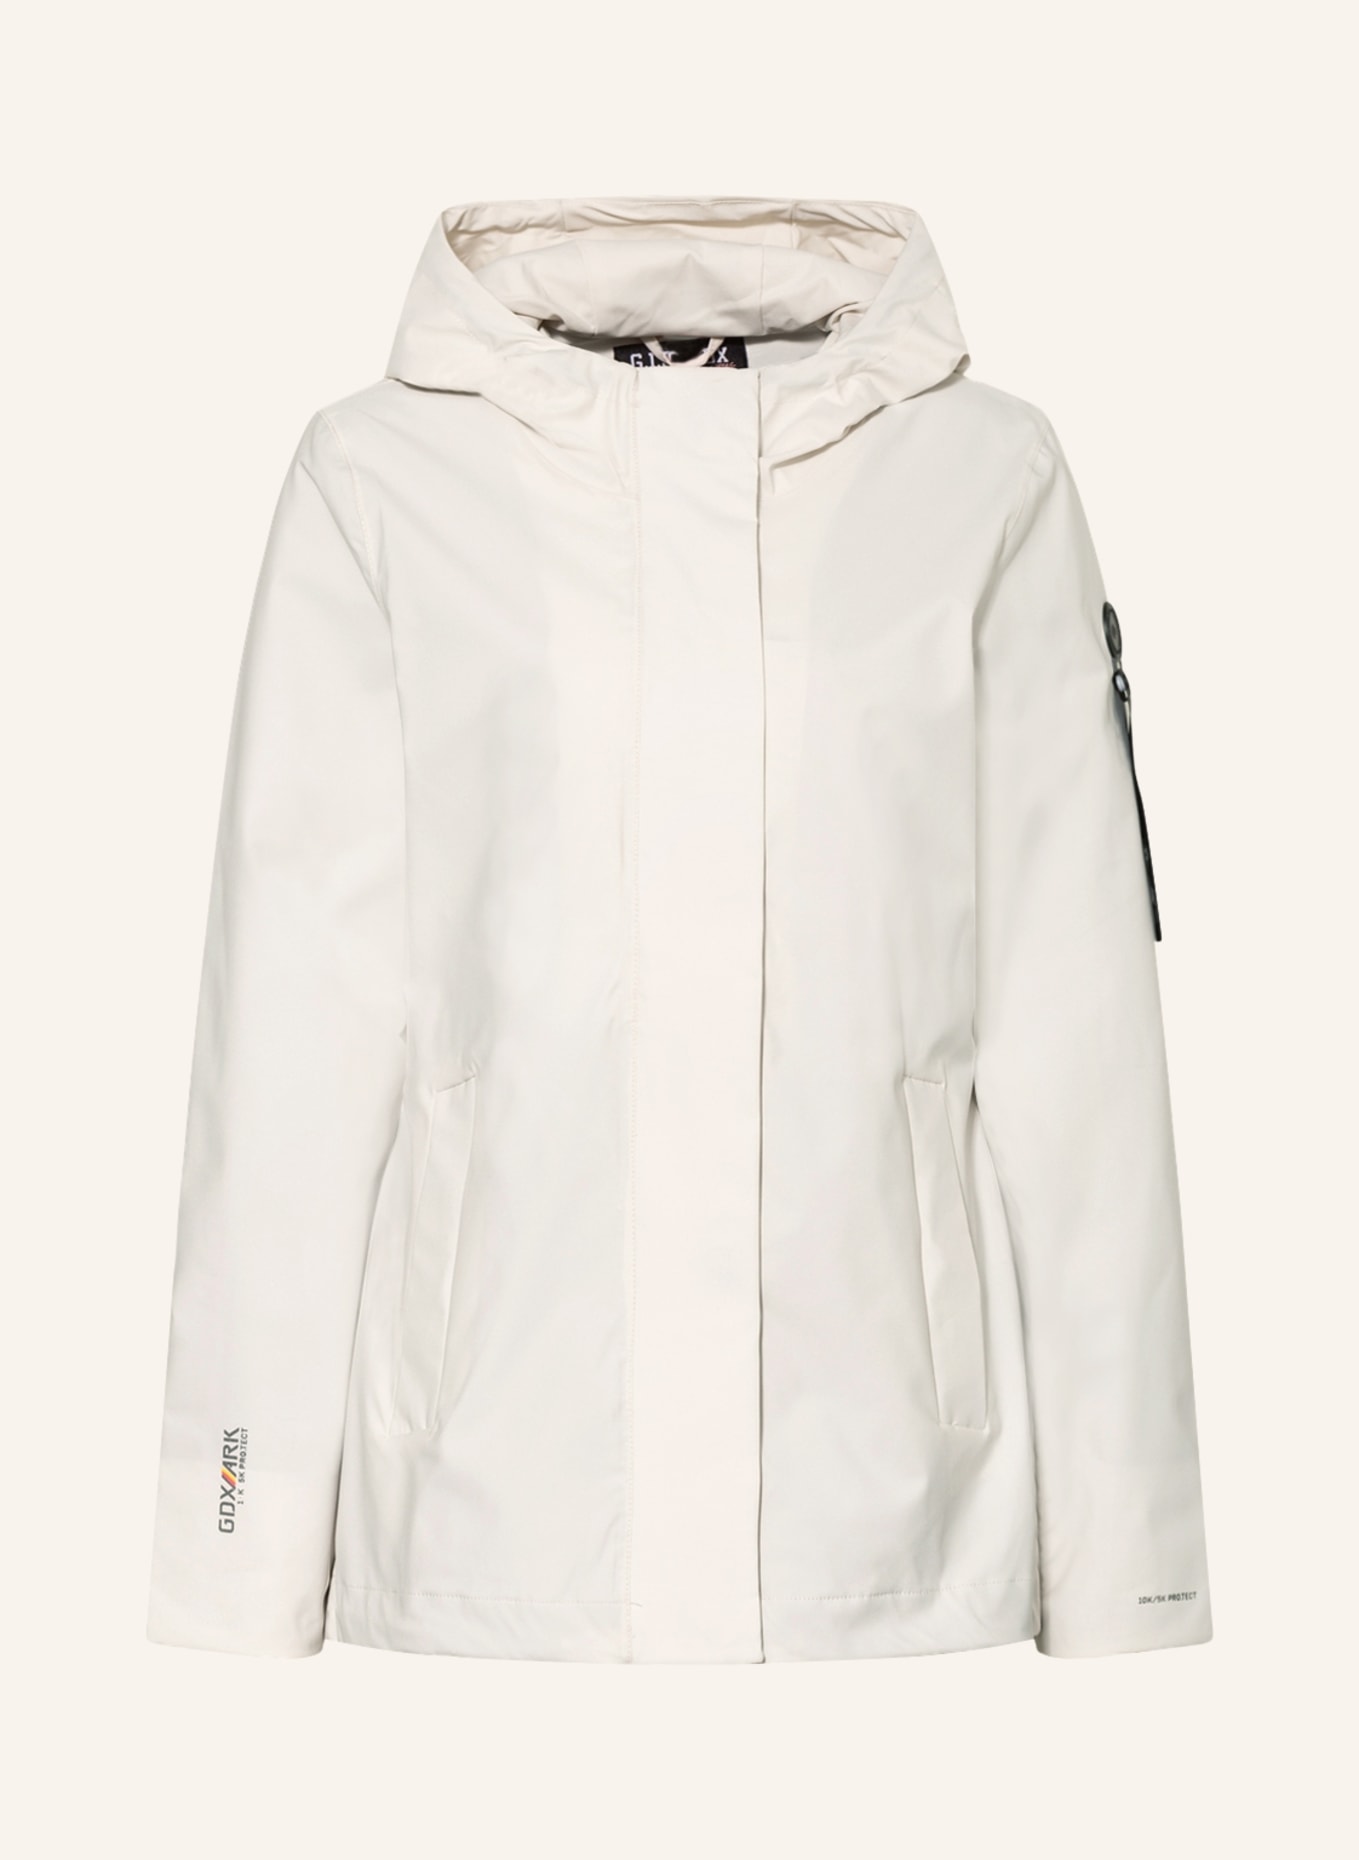 G.I.G.A. in GS DX jacket killtec Outdoor cream 152 by